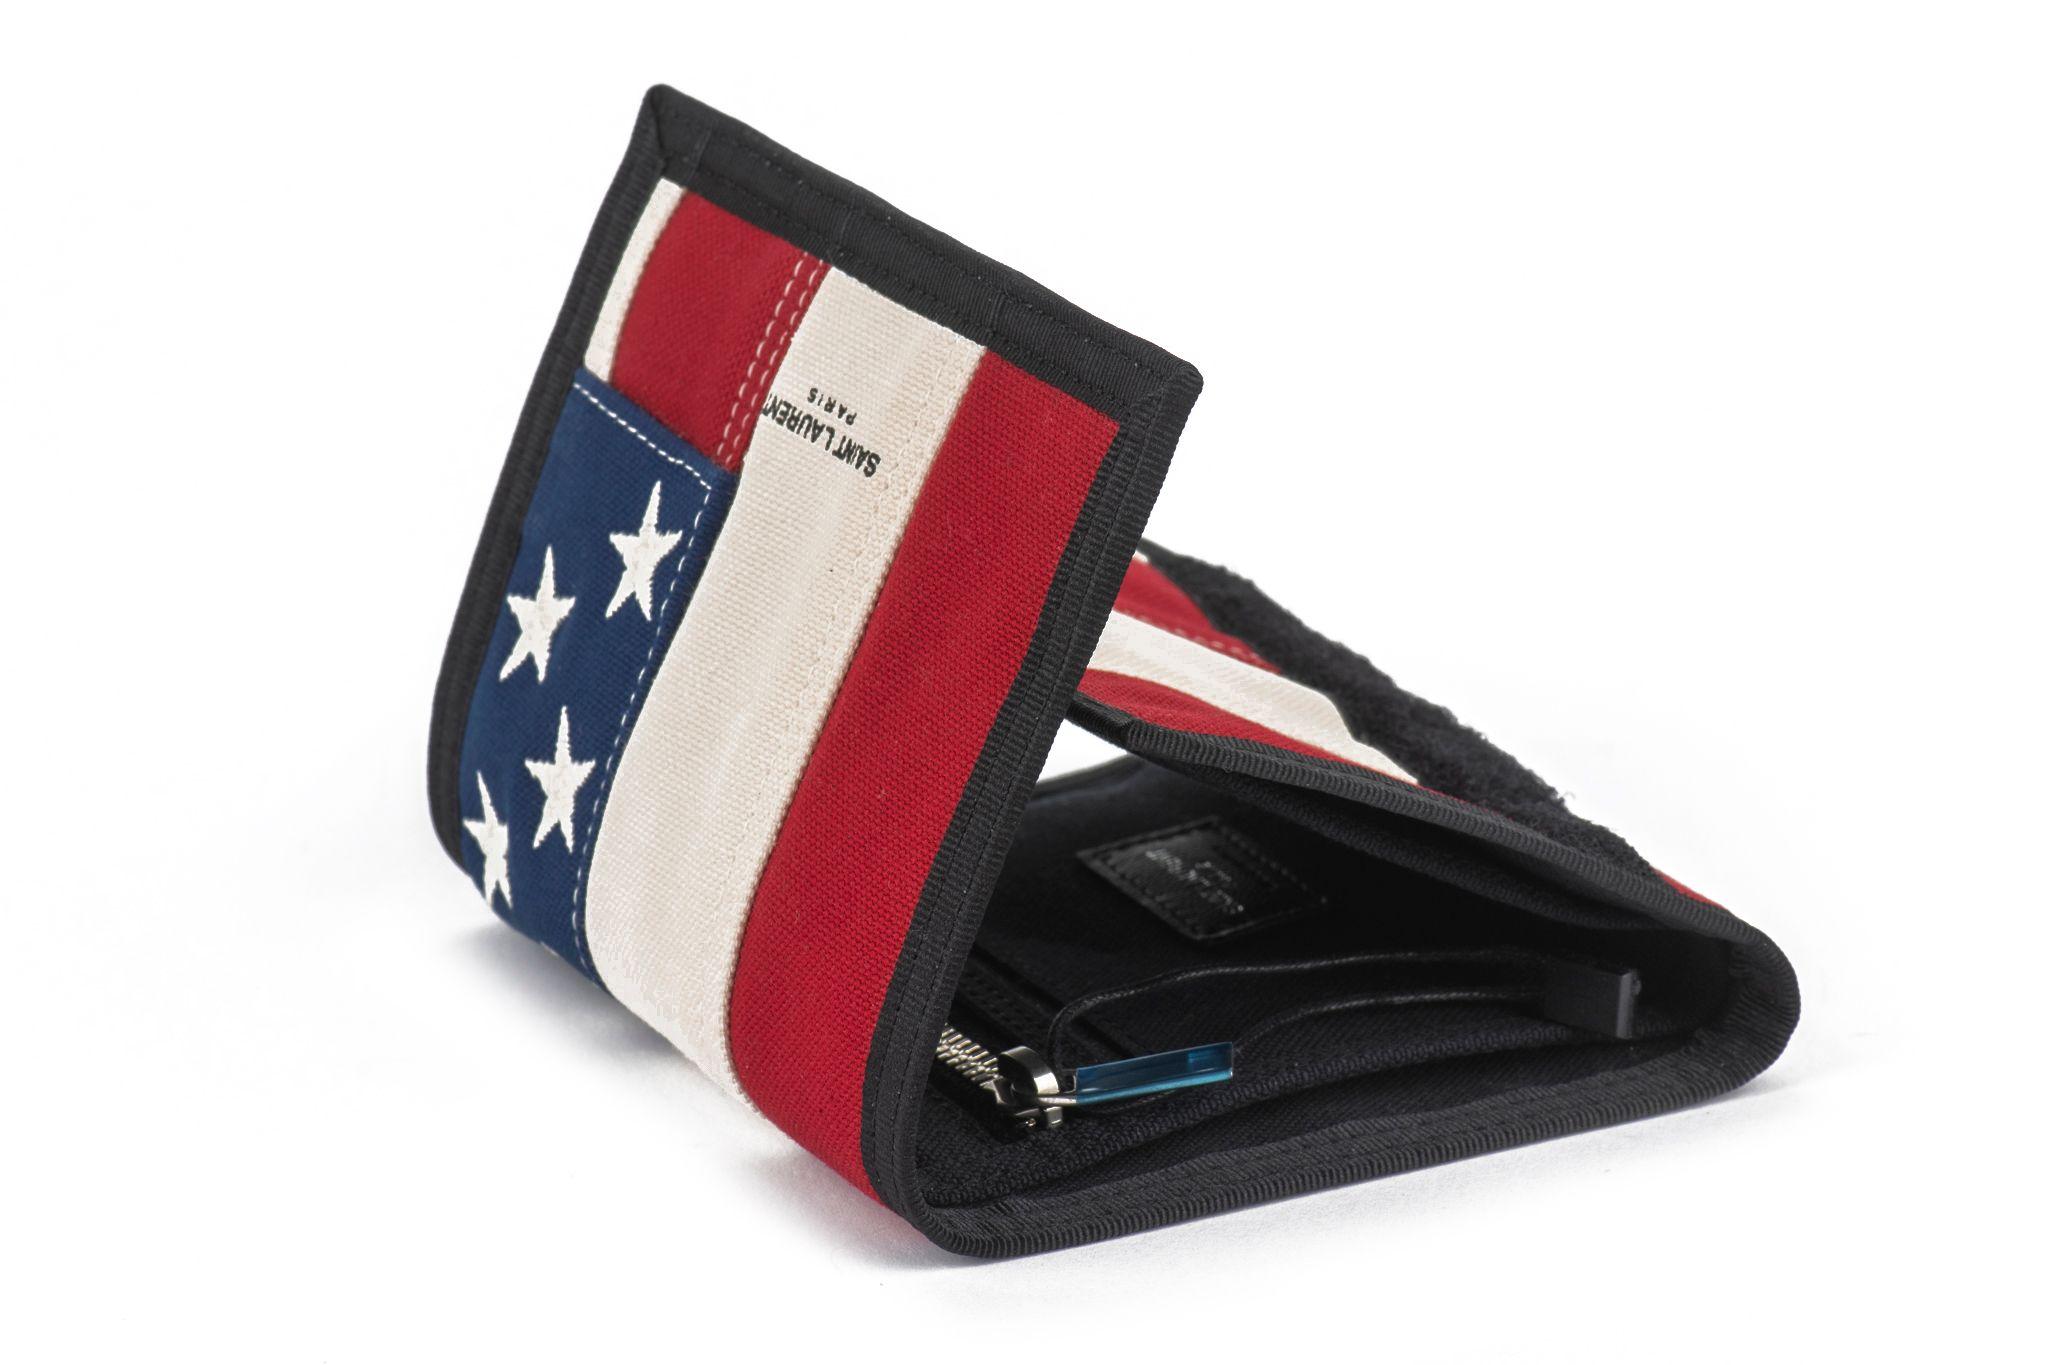 YSL new striped flag velcro wallet, unisex and timeless. Black fabric interior. 
Comes with booklets, original dust cover and original box.